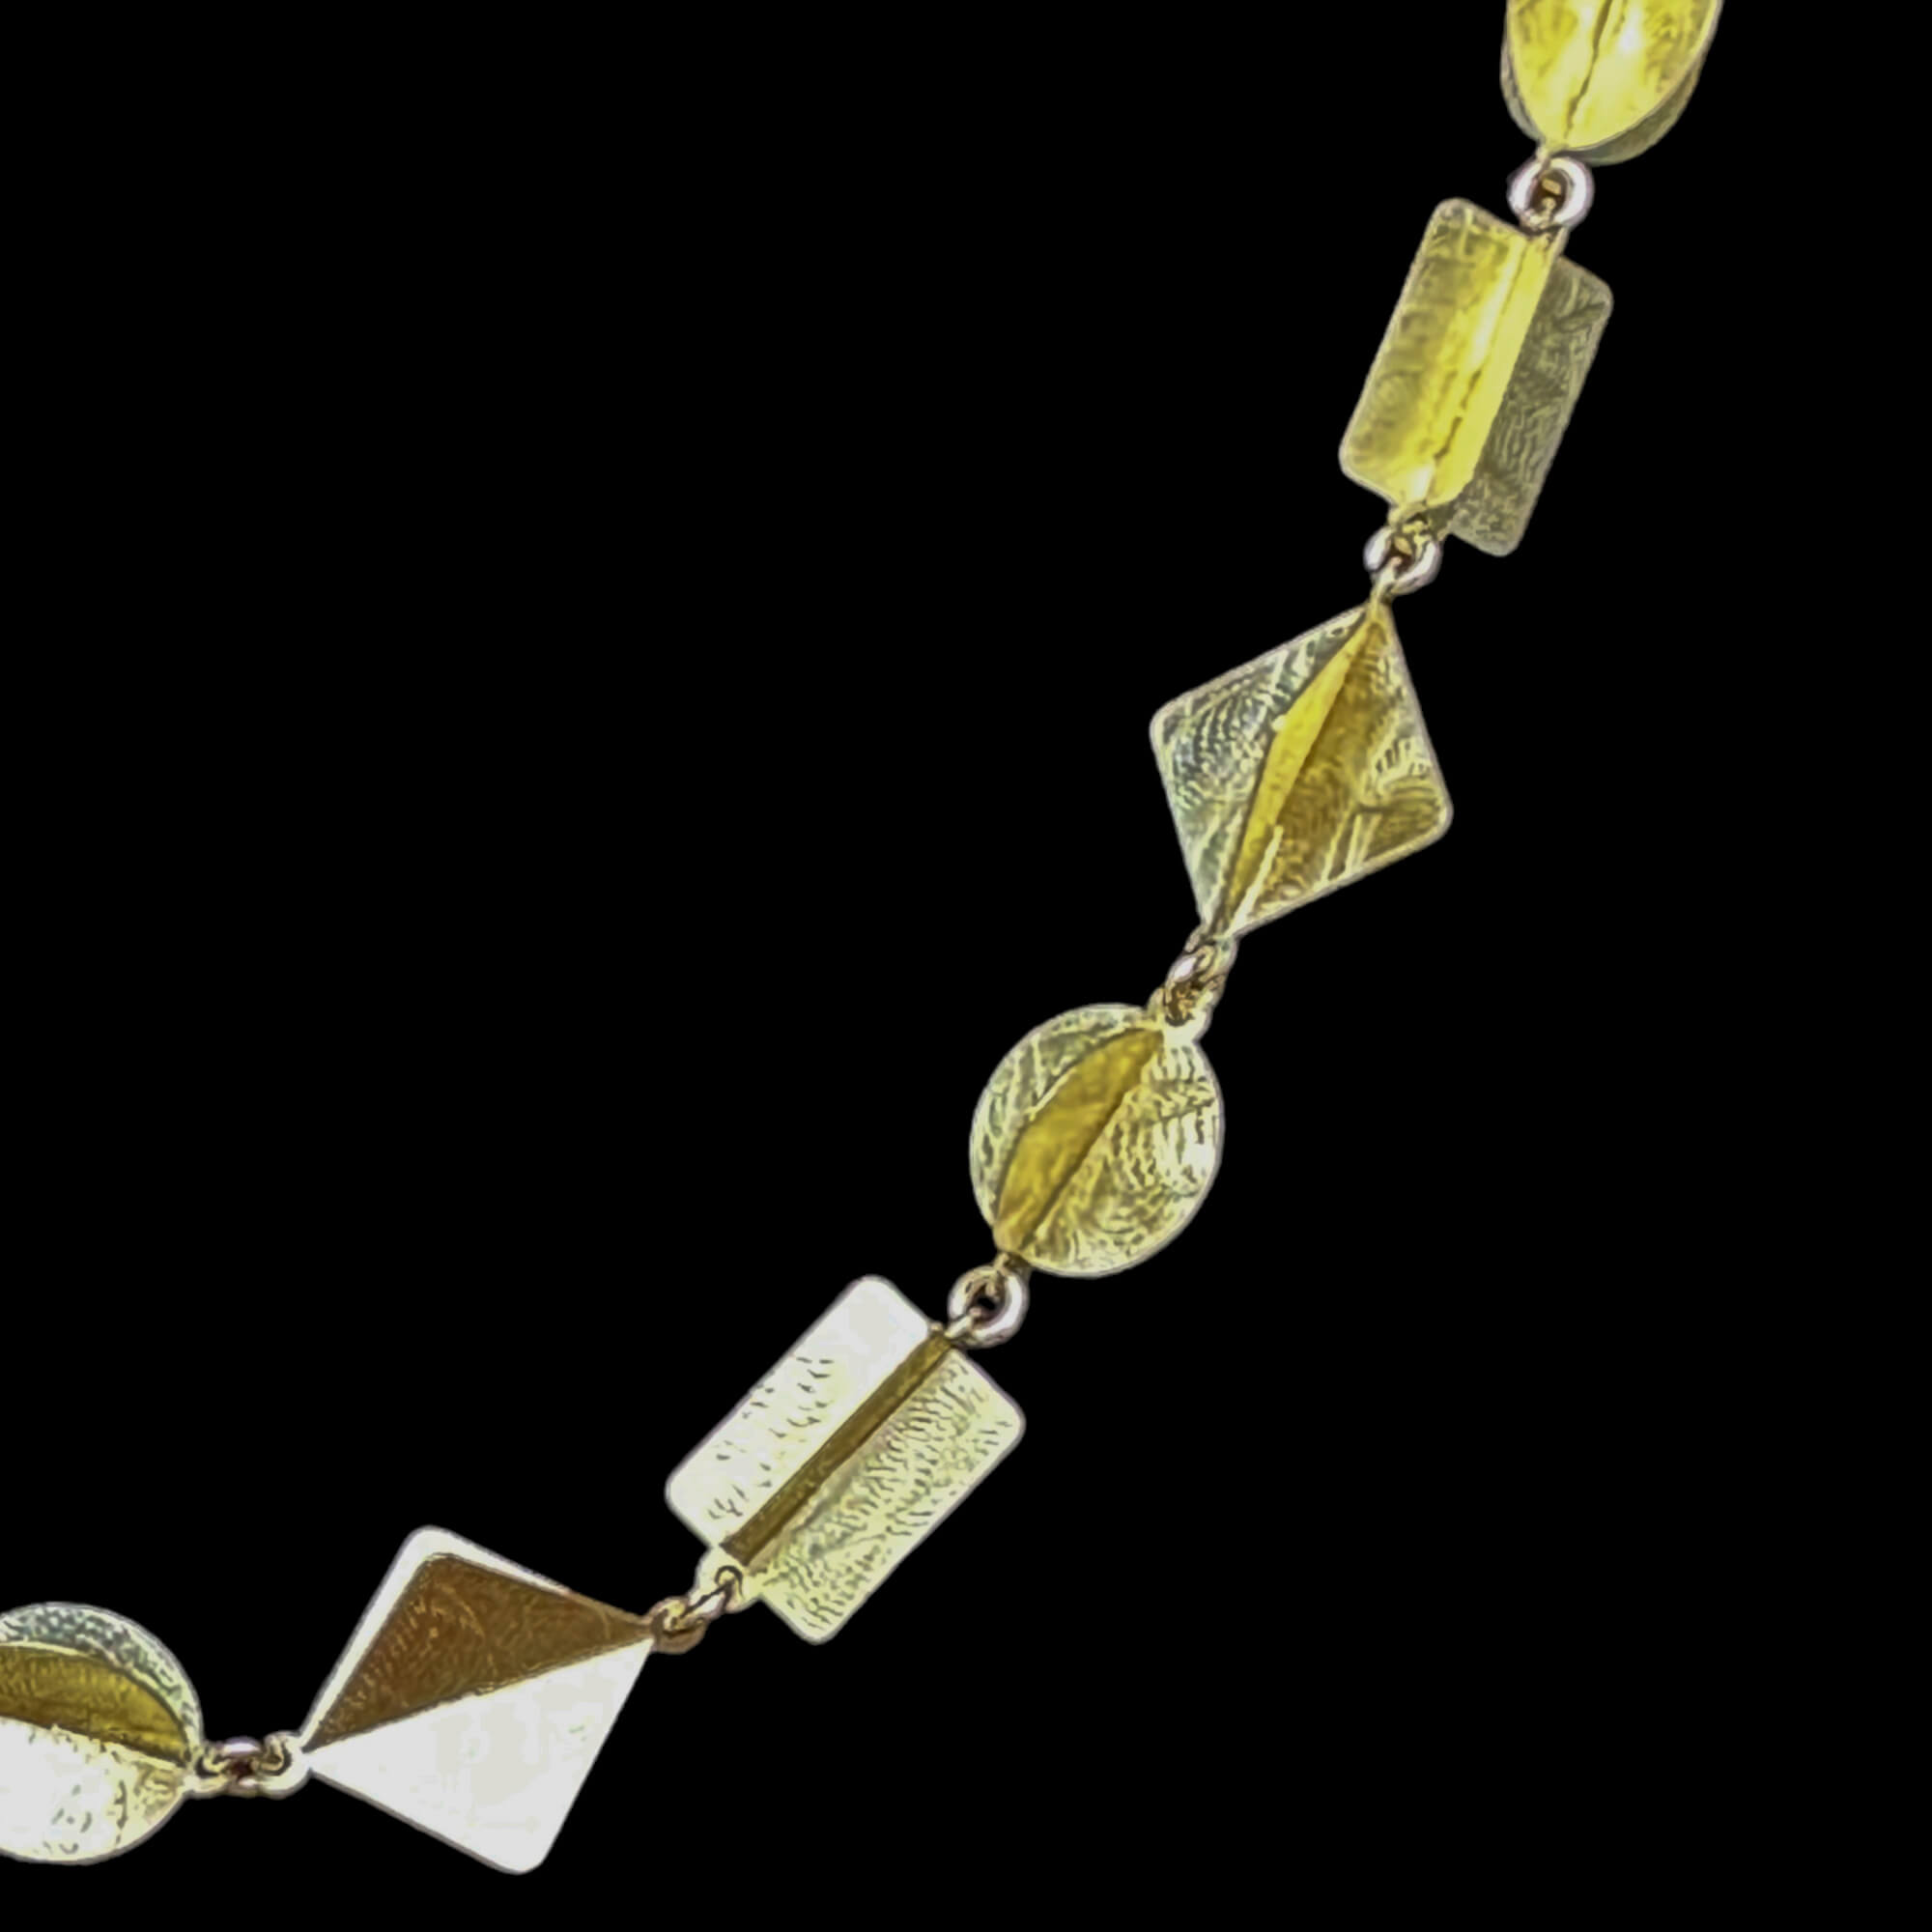 Multic-shaped necklace of gilded silver